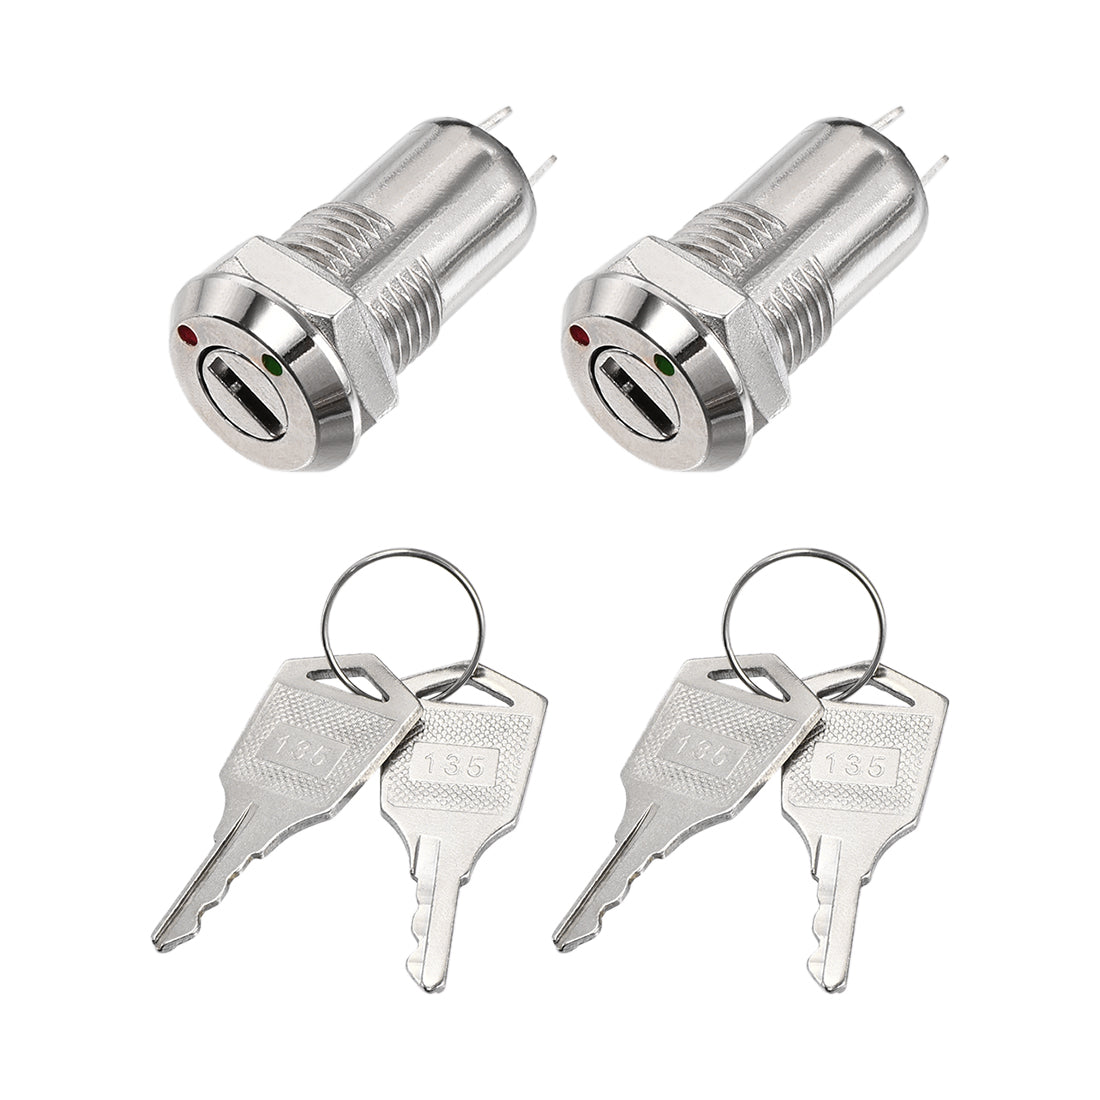 uxcell Uxcell 12mm 2 Positions Key Locking Push Button Switch NO-OFF pack of 2pcs